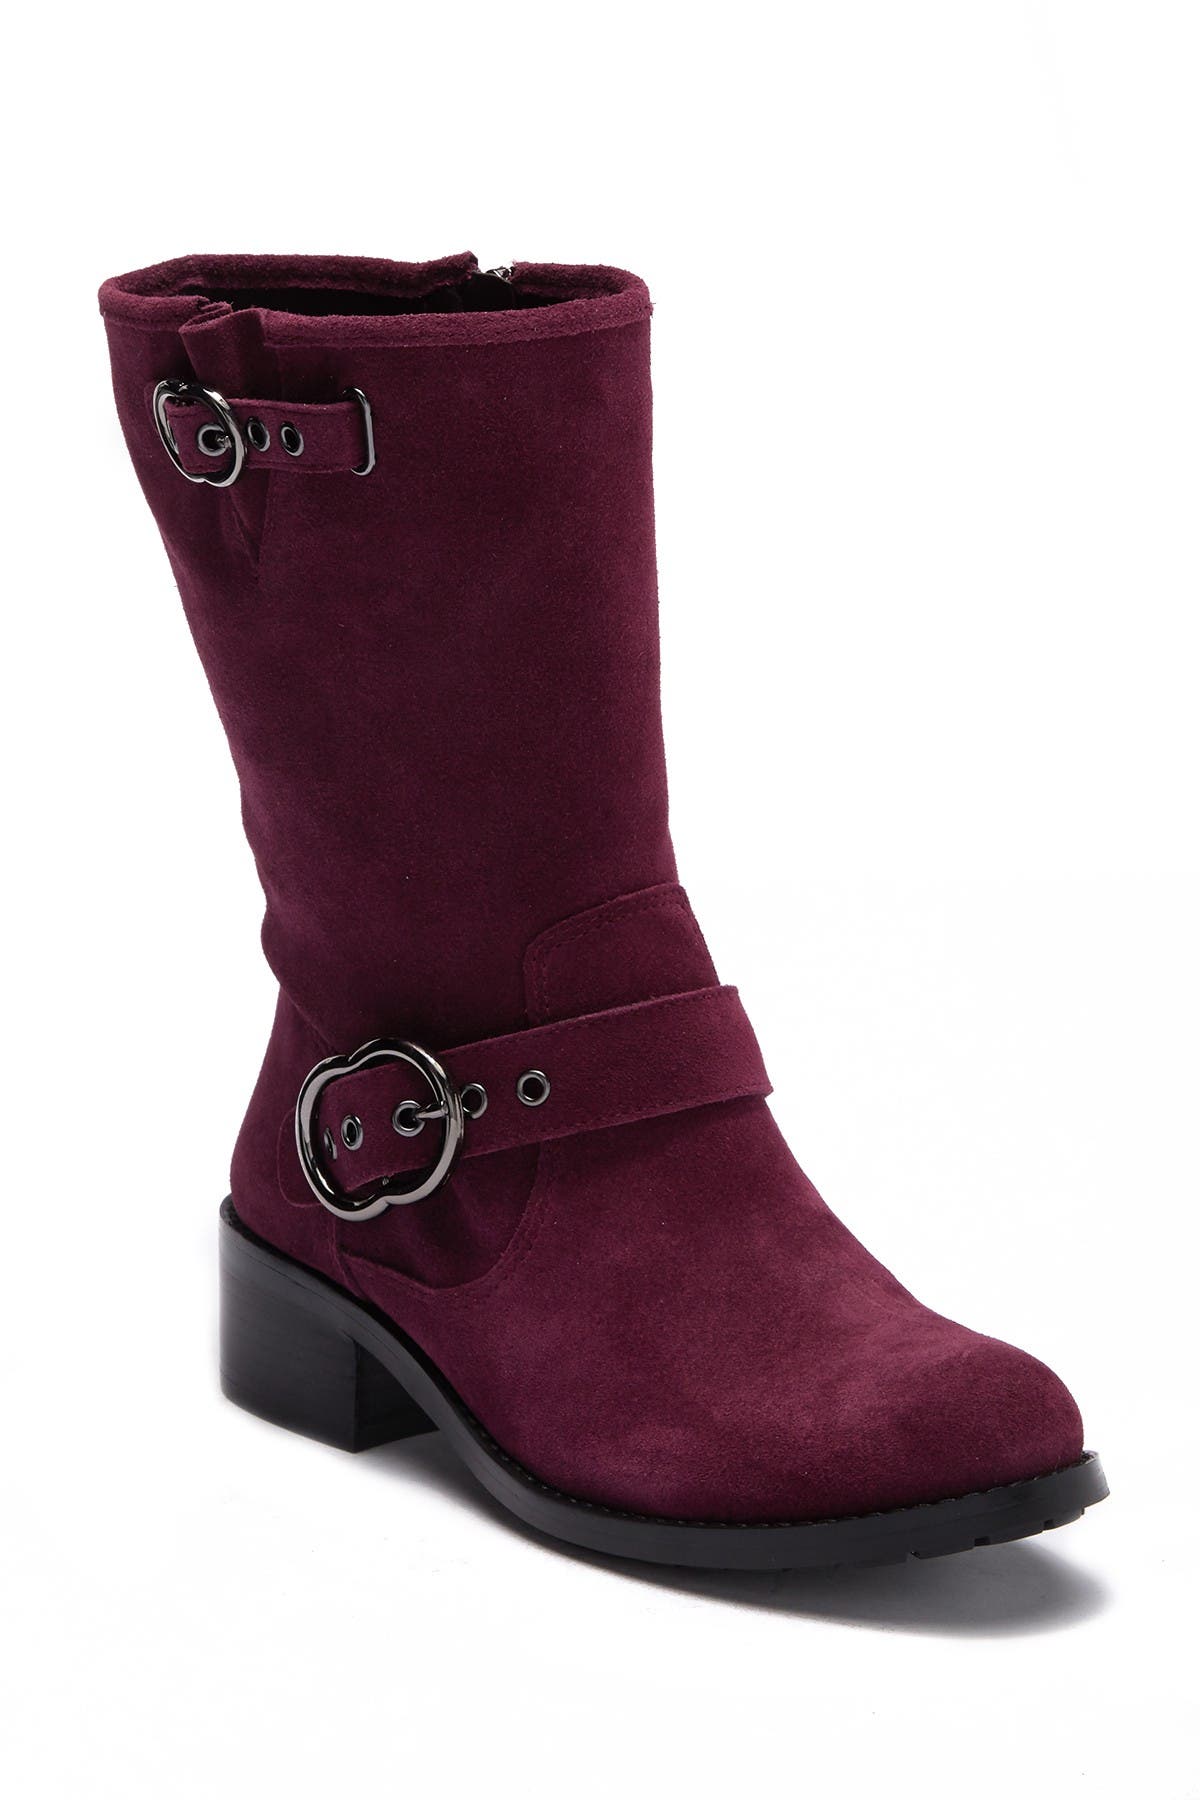 Vince Camuto | Wilan Riding Boot 